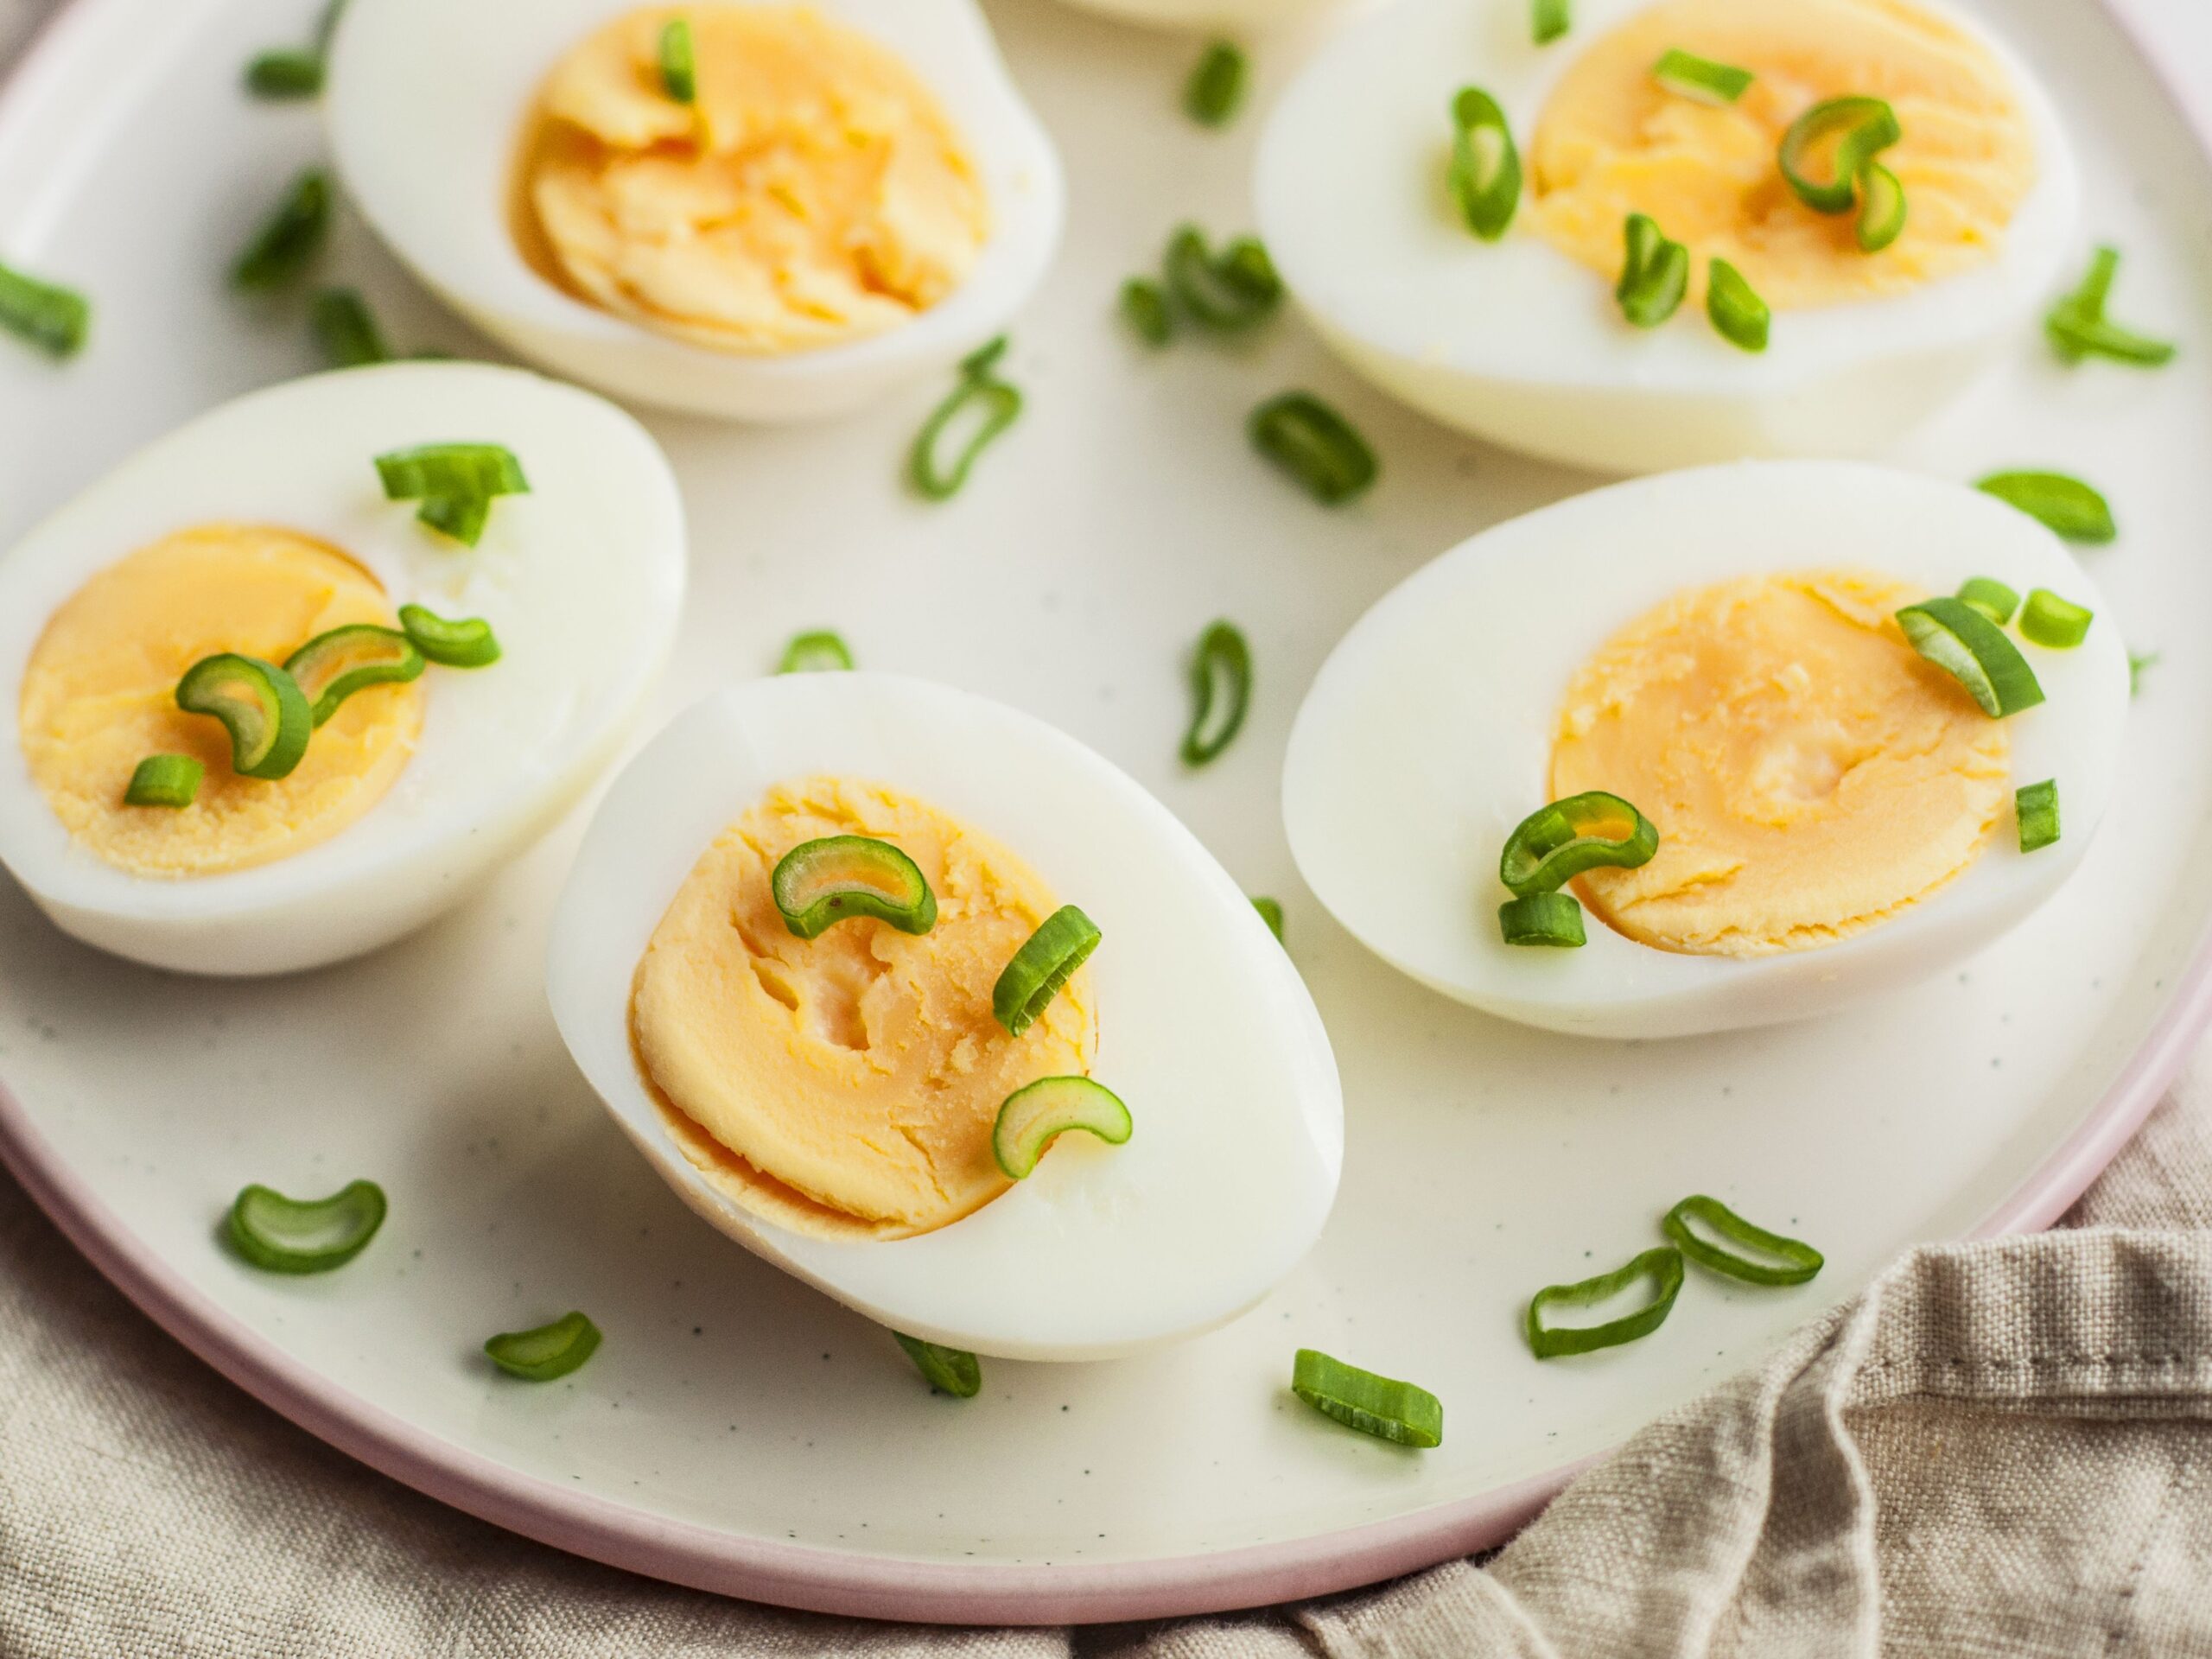  Eggs can help with Hormonal Steadiness levels in health.